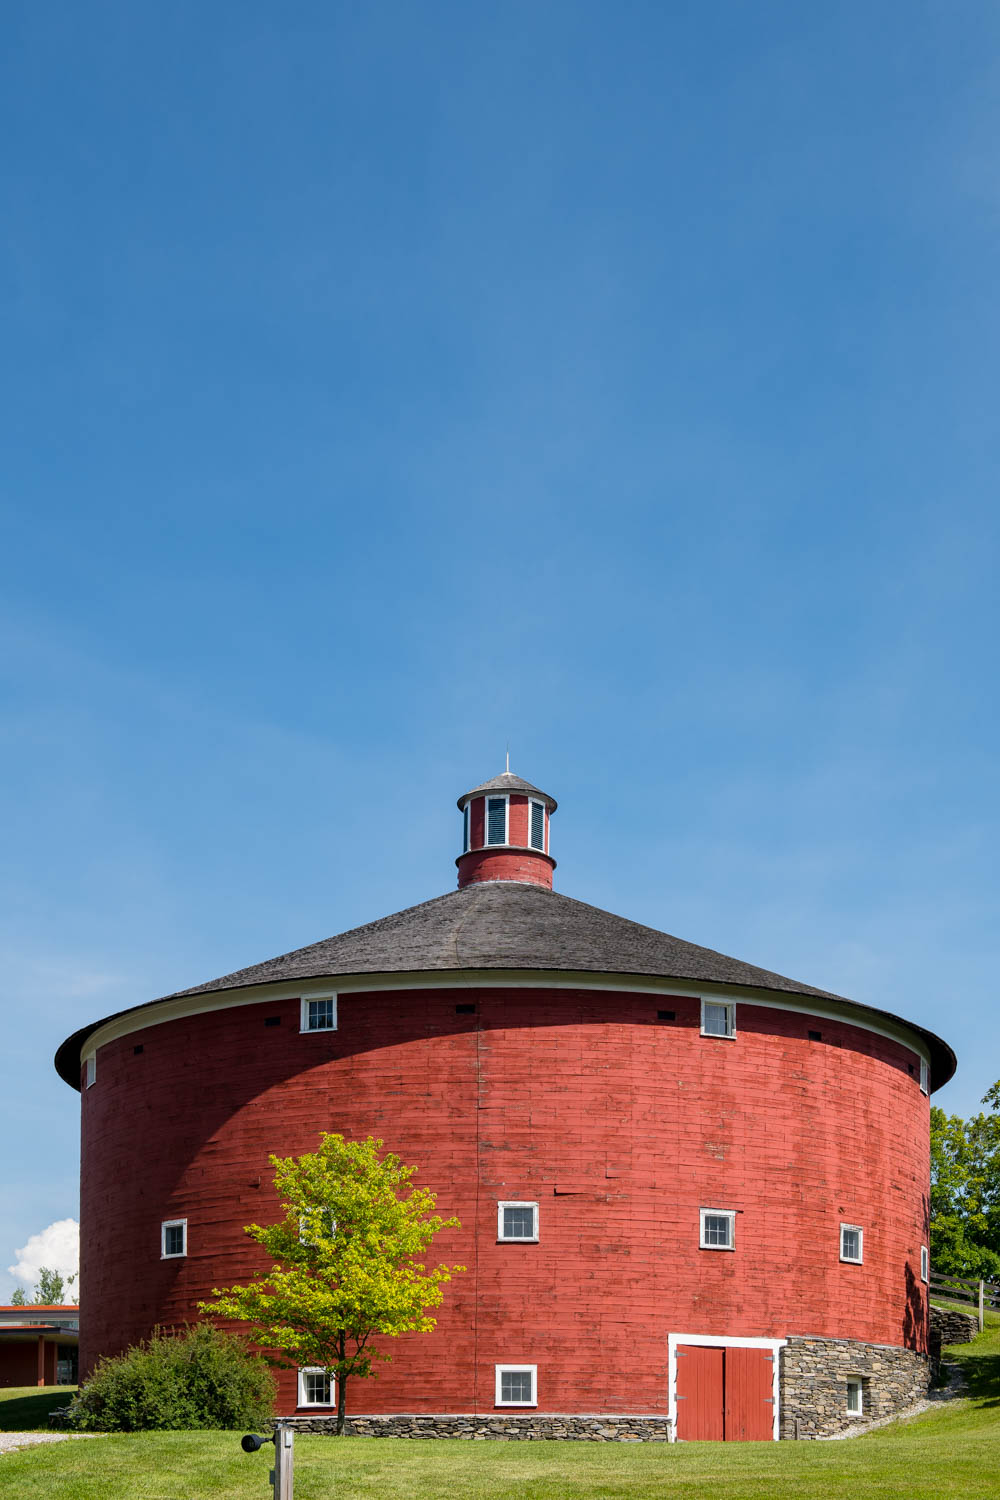 Photo of Silo at Shelburne Museum, in Shelburne, VT, taken by Accidentally Wes Anderson